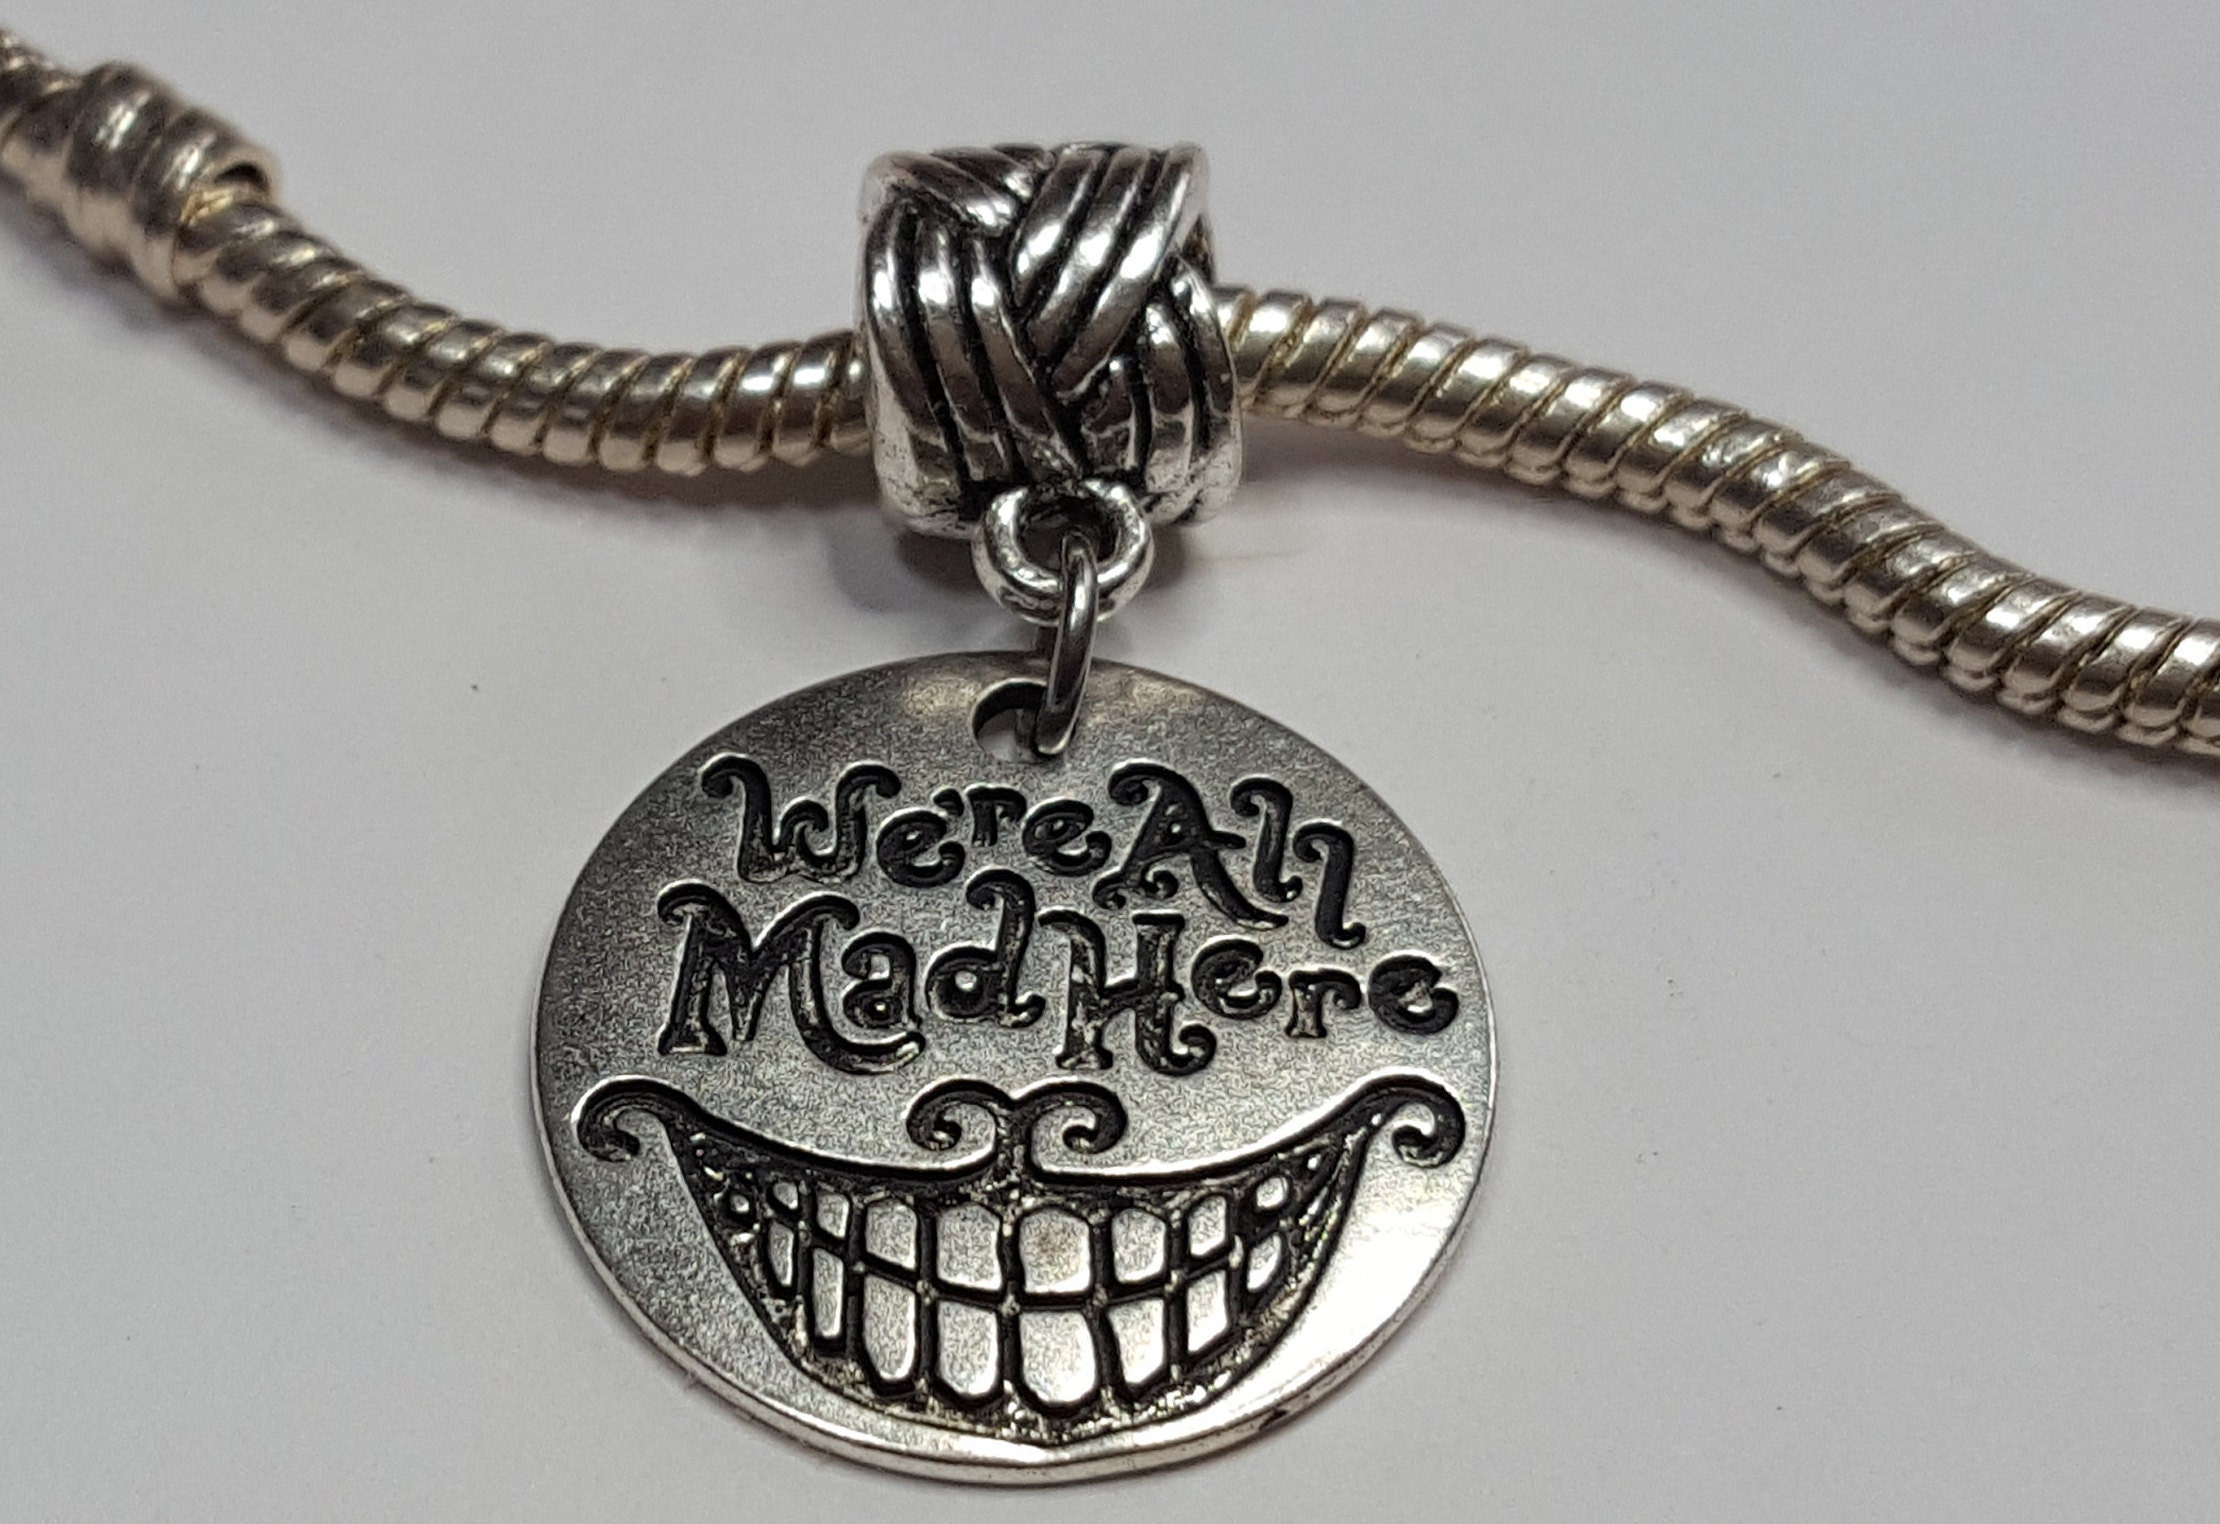 2021-wdw-uptown-jewelers-alice-in-wonderland-pandora-charms-cheshire-cat- mad-hatter-hat 